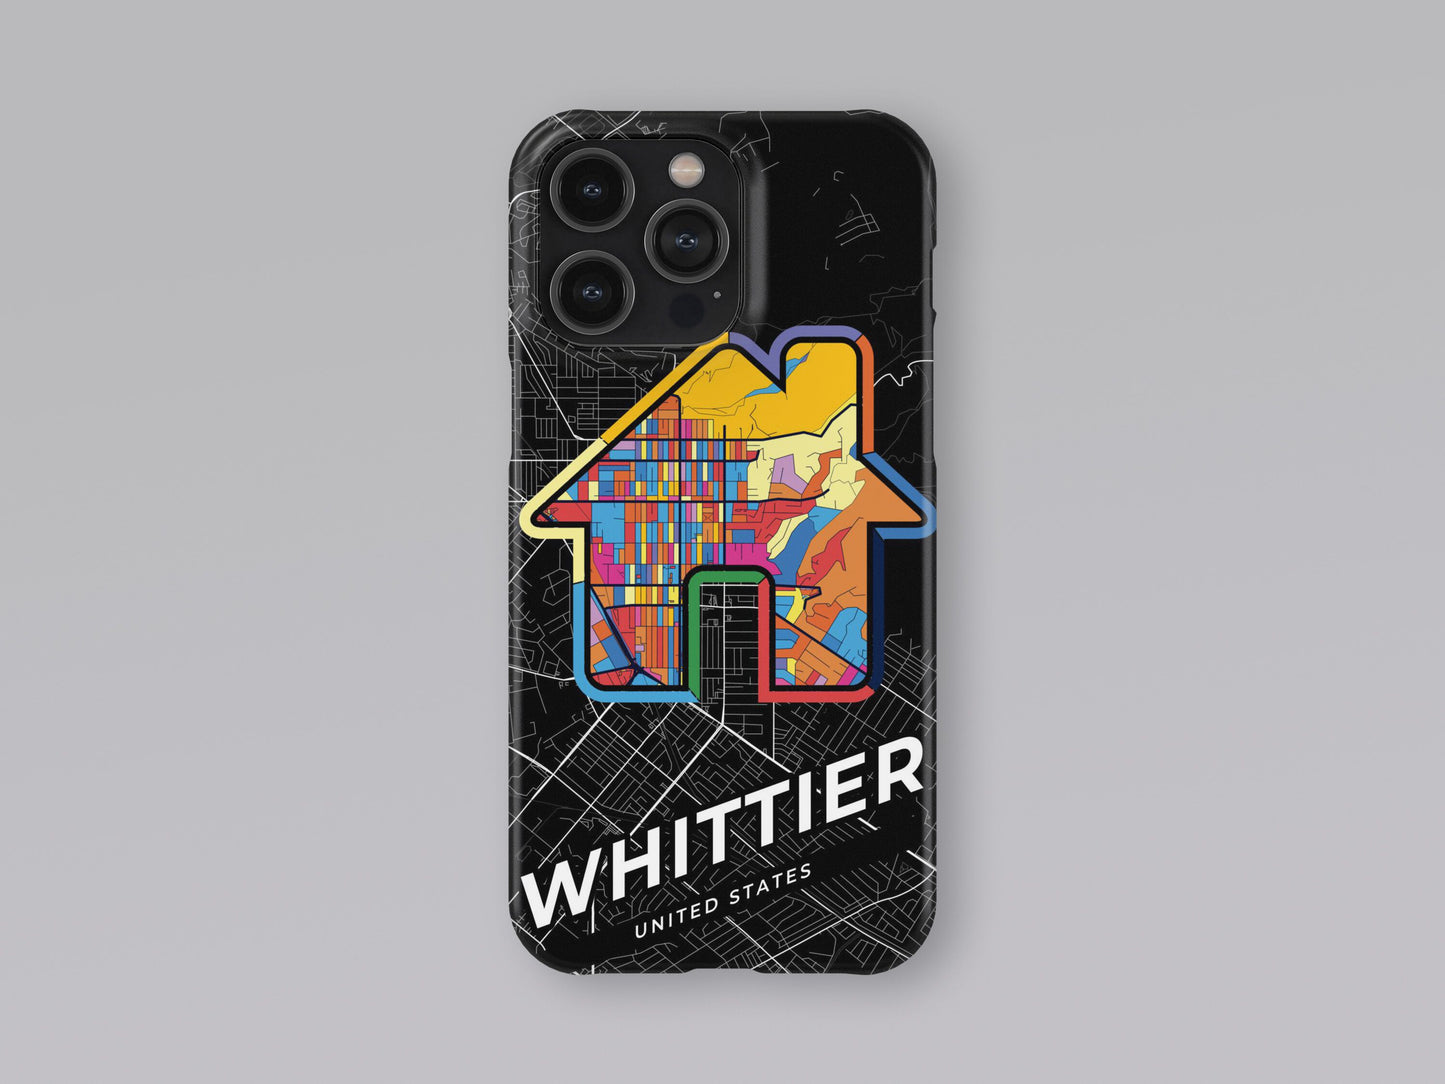 Whittier California slim phone case with colorful icon 3